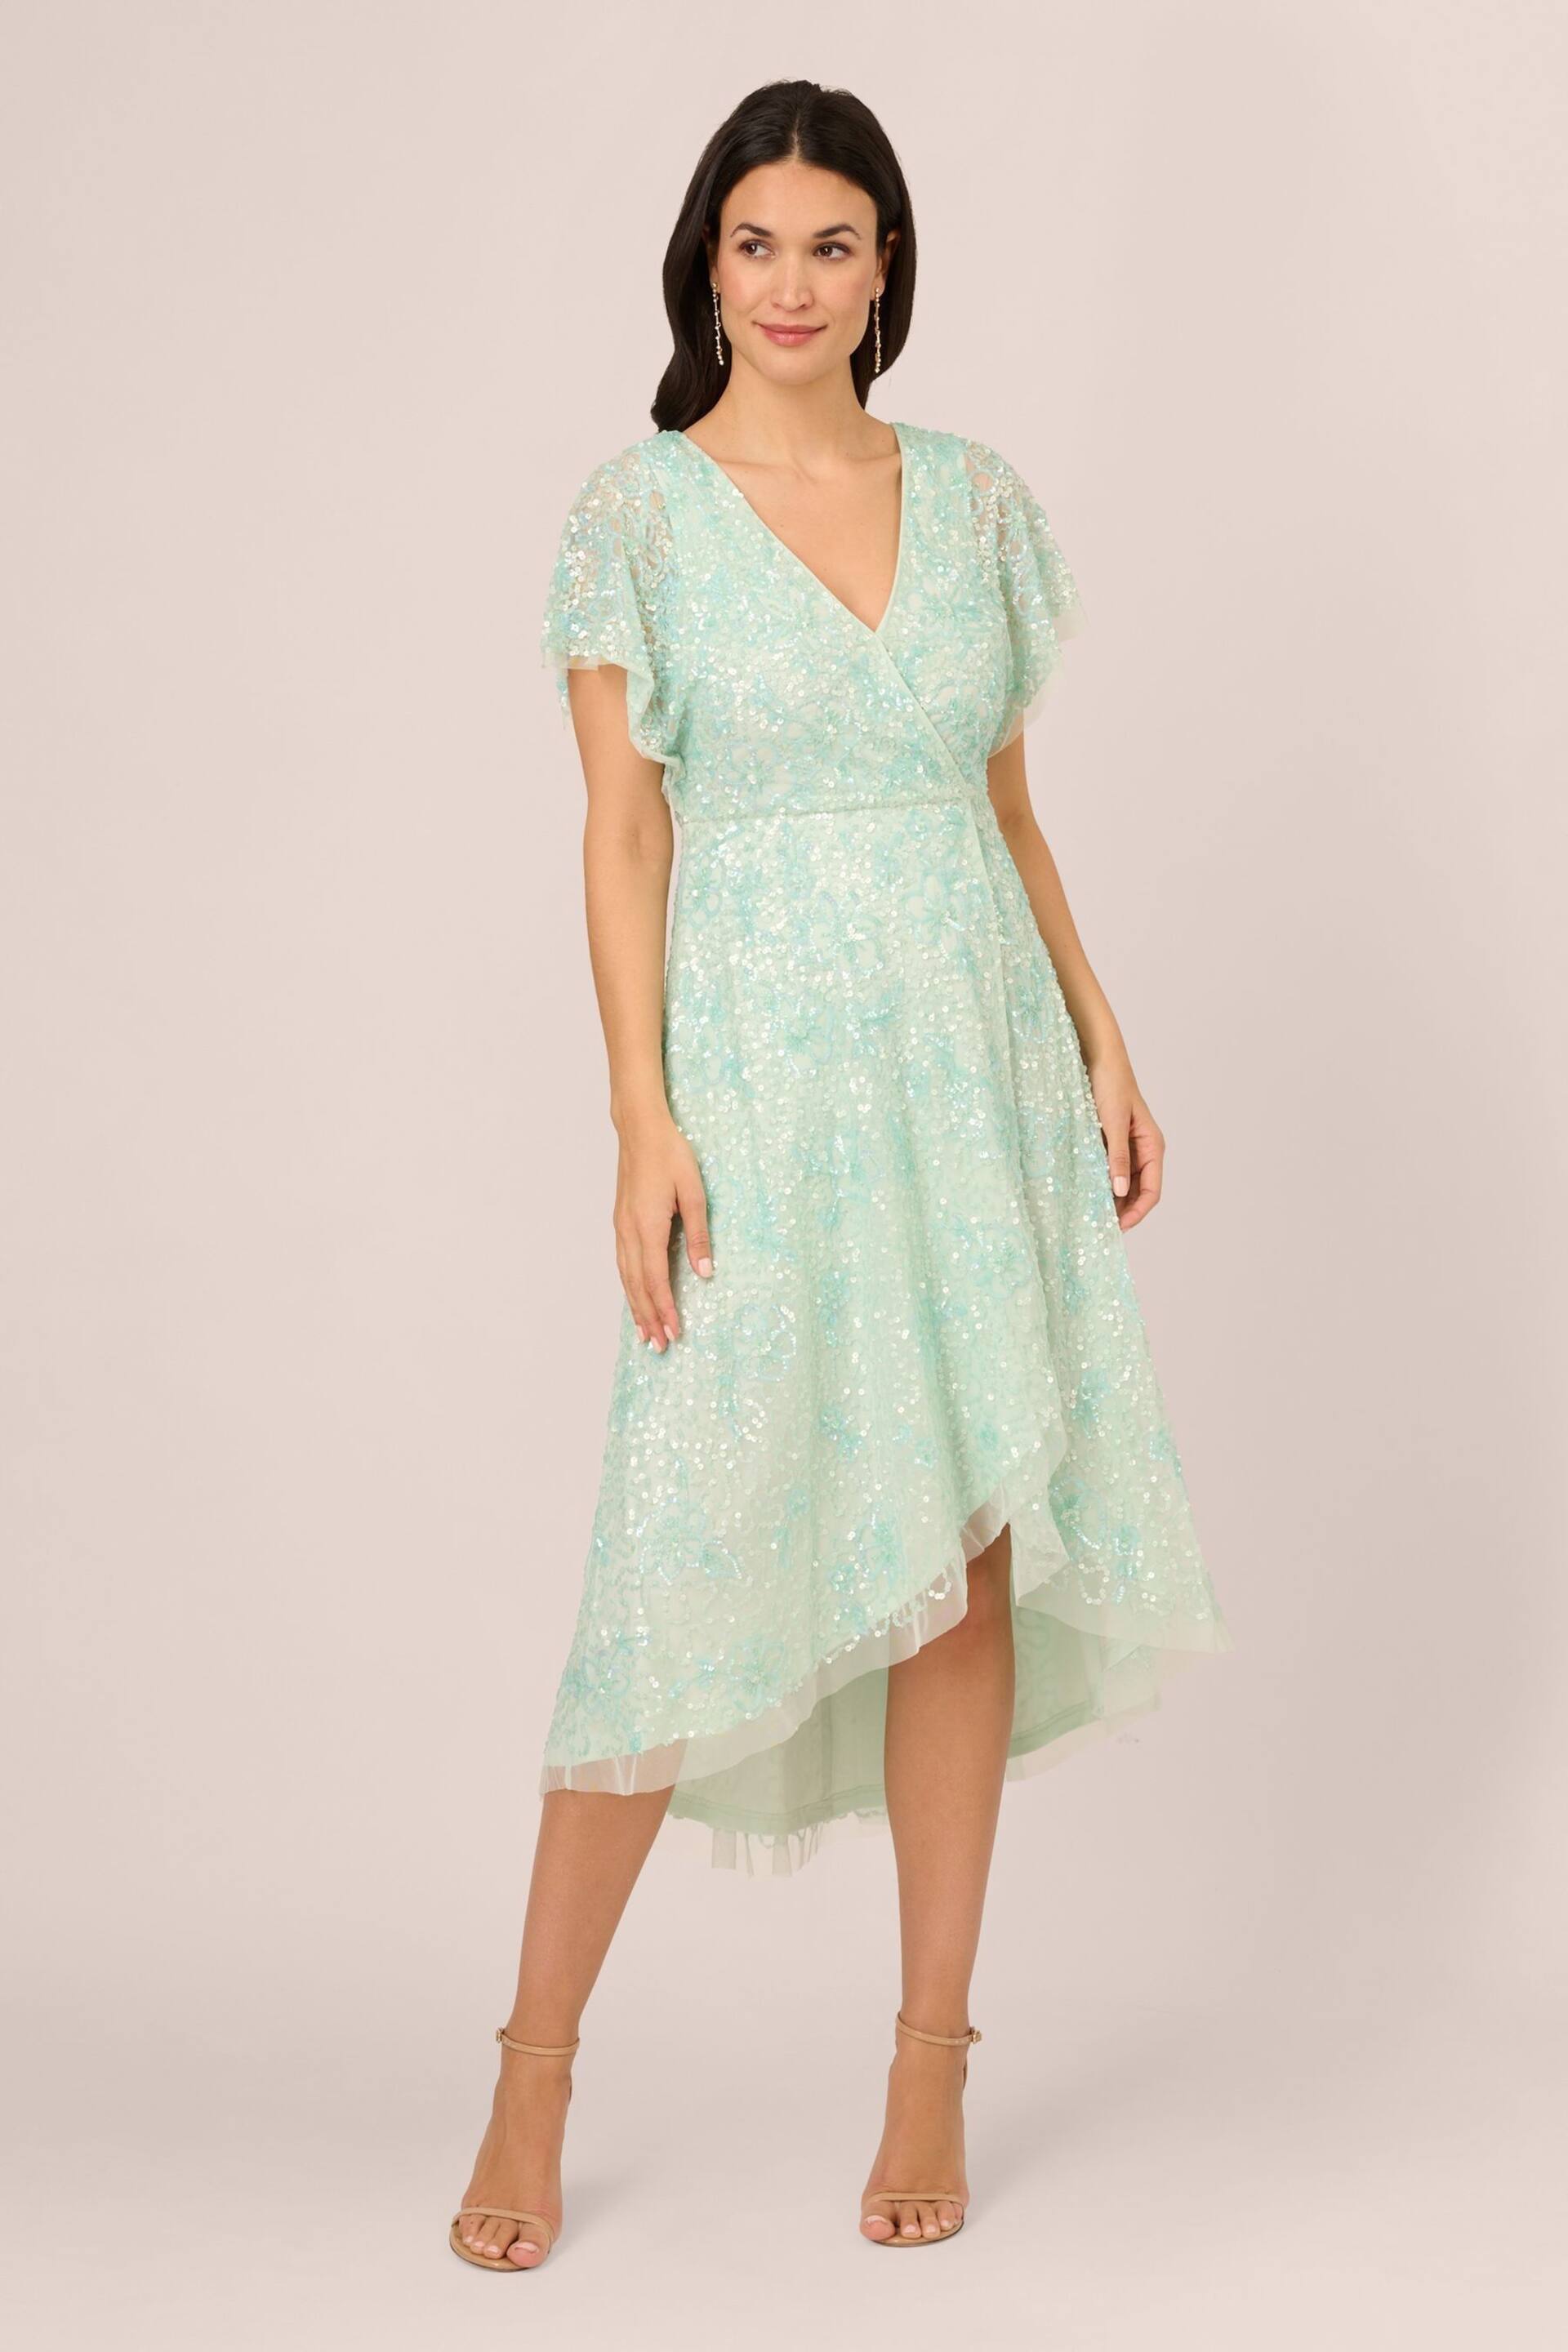 Adrianna Papell Green Beaded Mesh Wrap Dress - Image 1 of 7